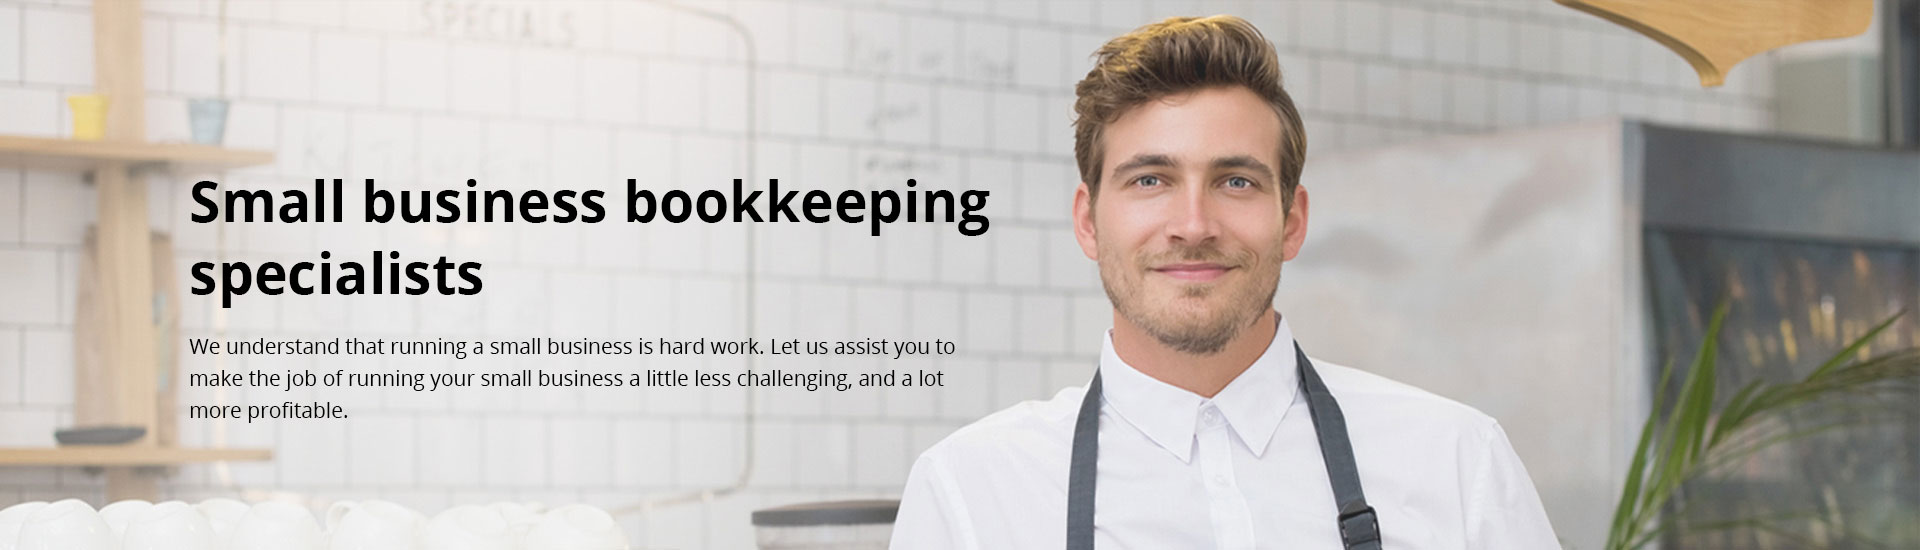 Small business bookkeeping specialists. We understand that running a small business is hard work. Let us assist you to make the job or running your small business a little less challenging and a lot more profitable.